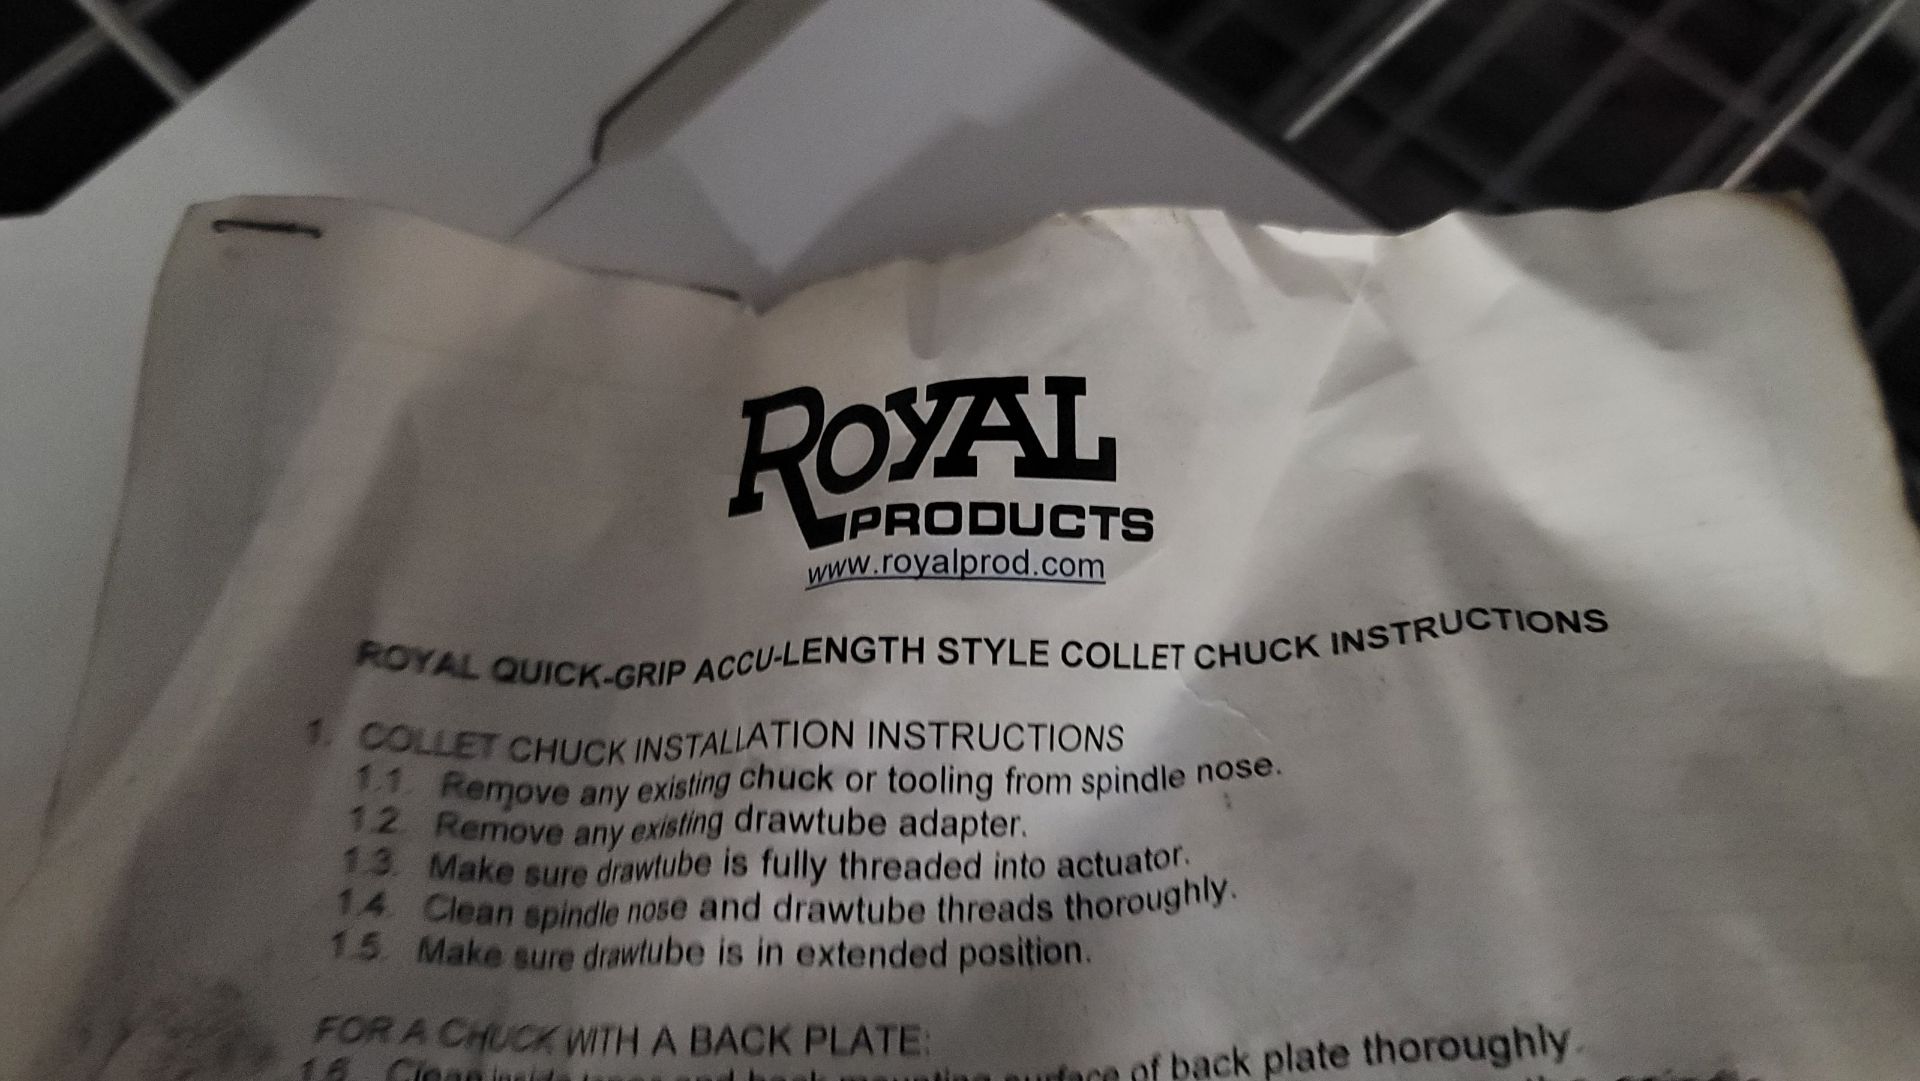 ROYAL PRODUCTS QUICK-GRIP ACCU-LENGTH STYLE COLLET CHUCK, AS PICTURED - Image 2 of 2